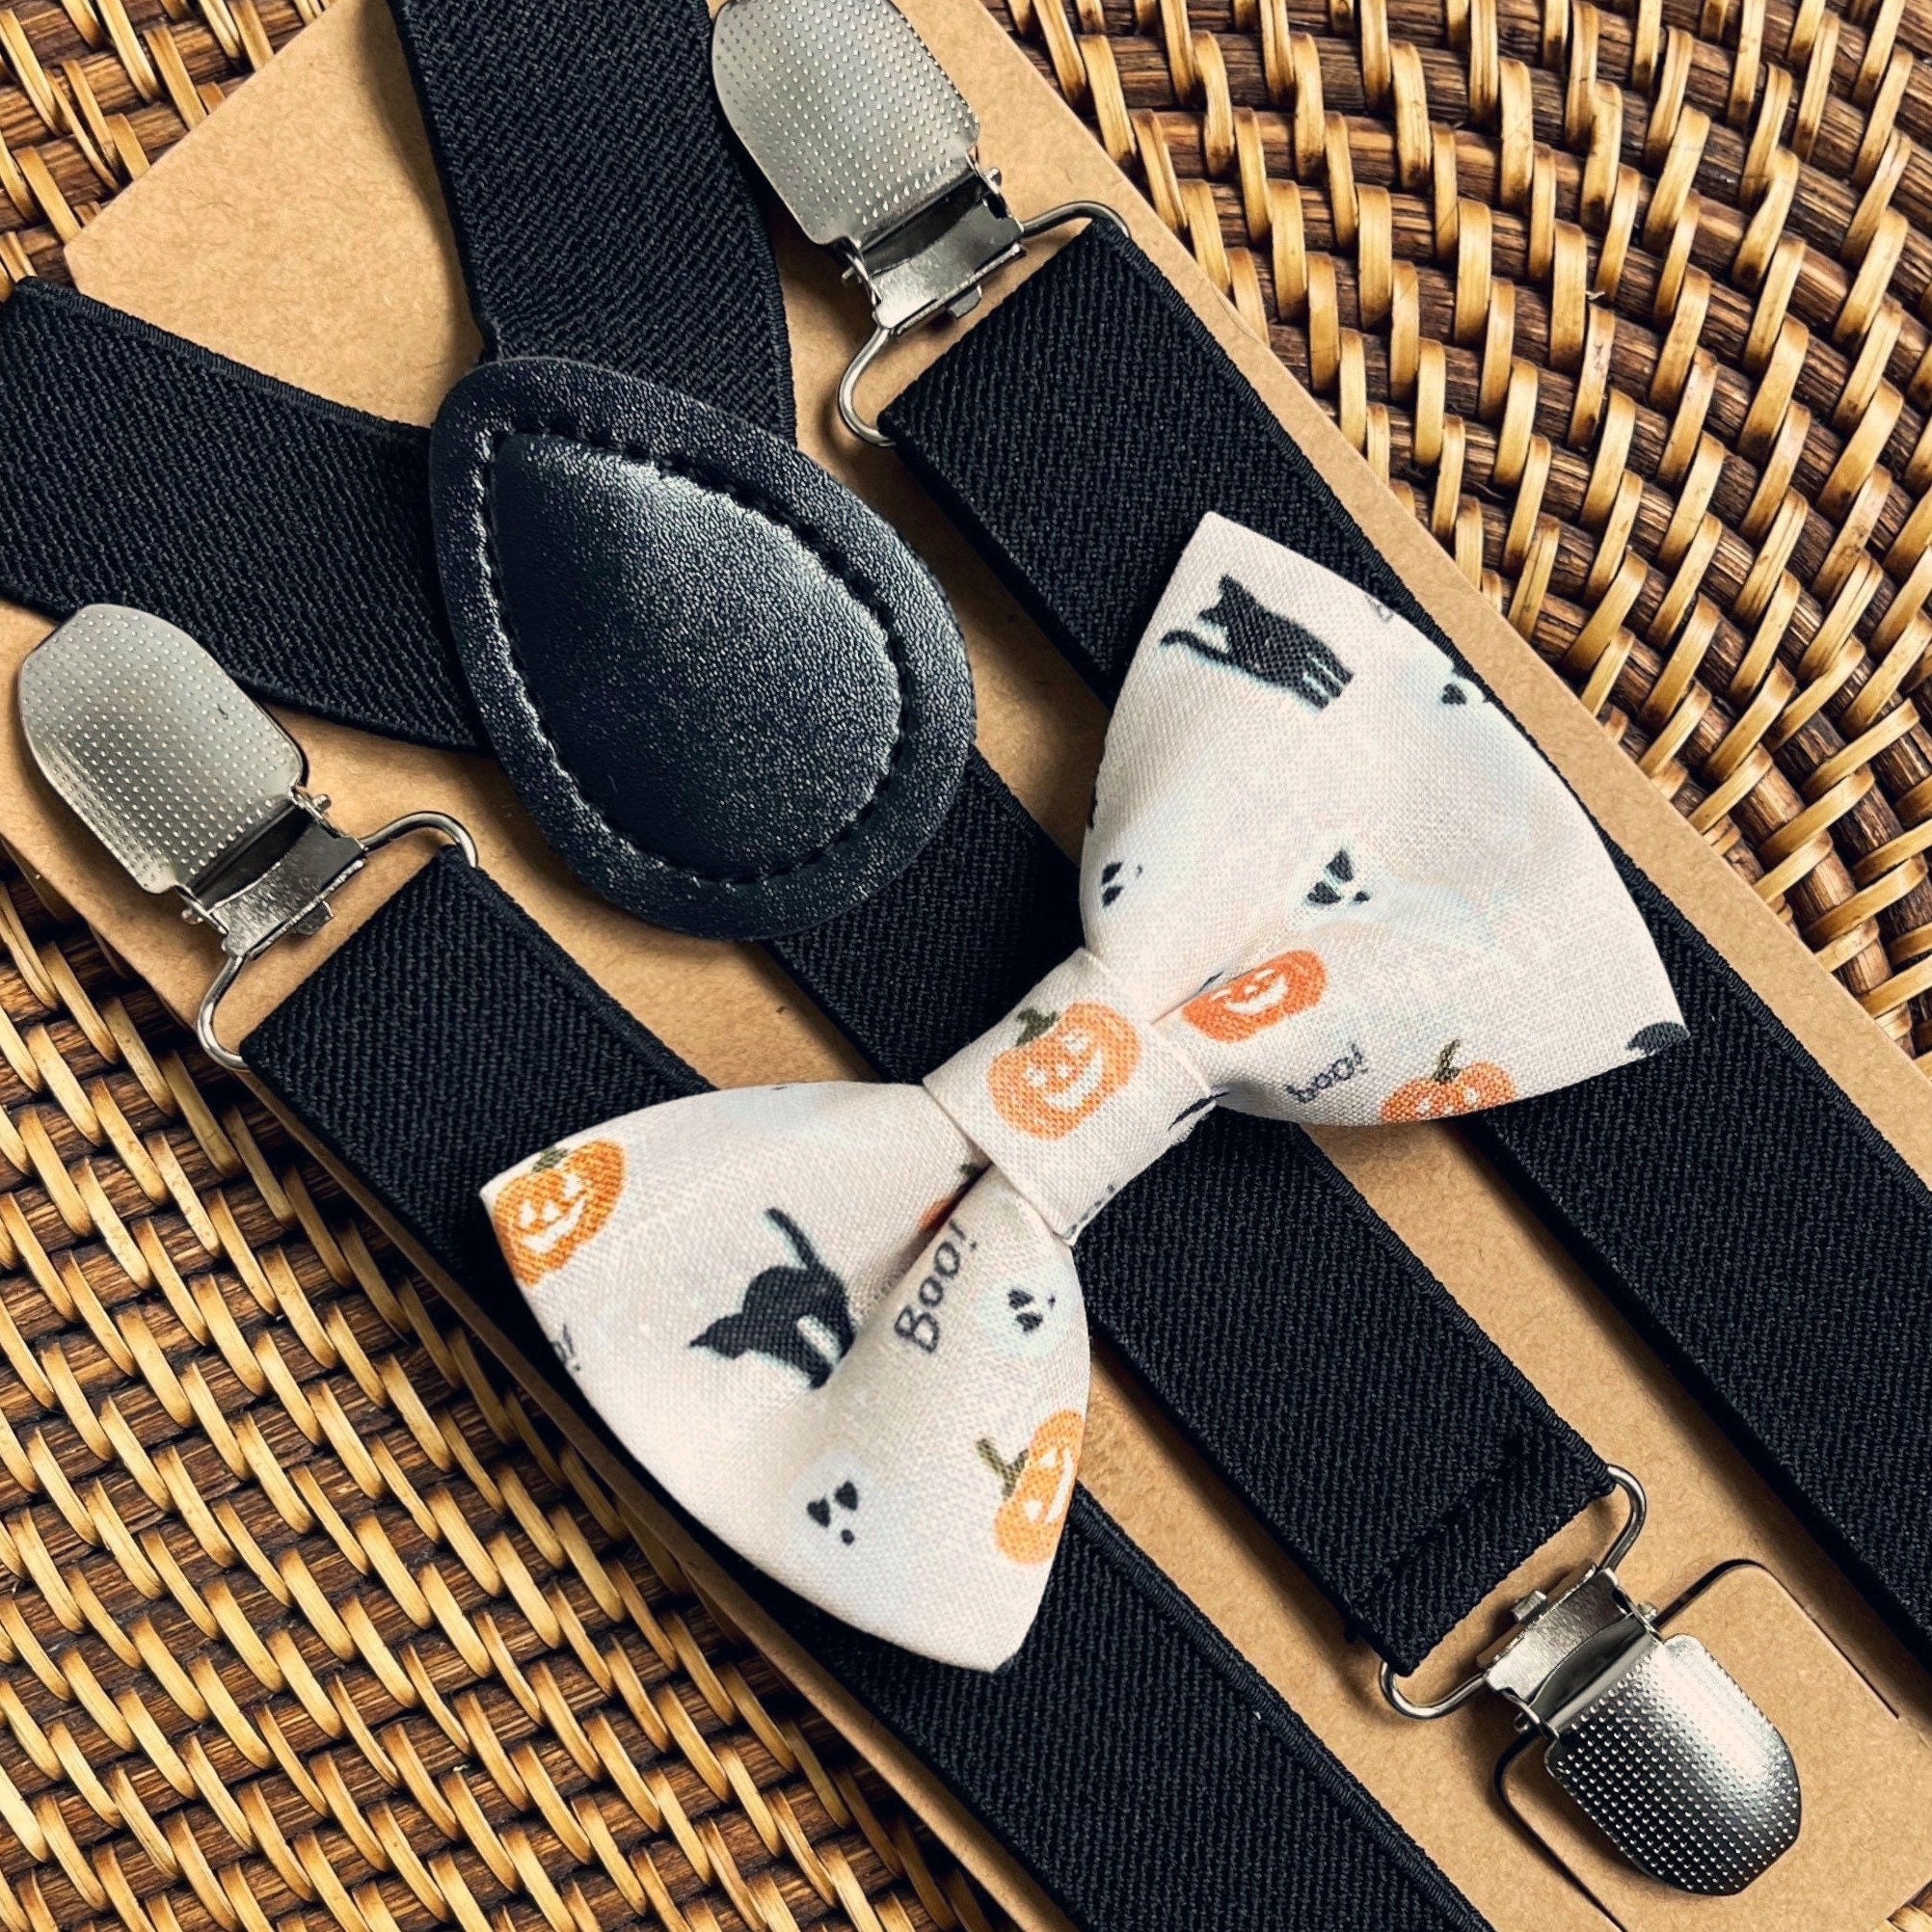 Orange Bow Tie and Suspenders with Black Cats, Pumpkins and Ghosts